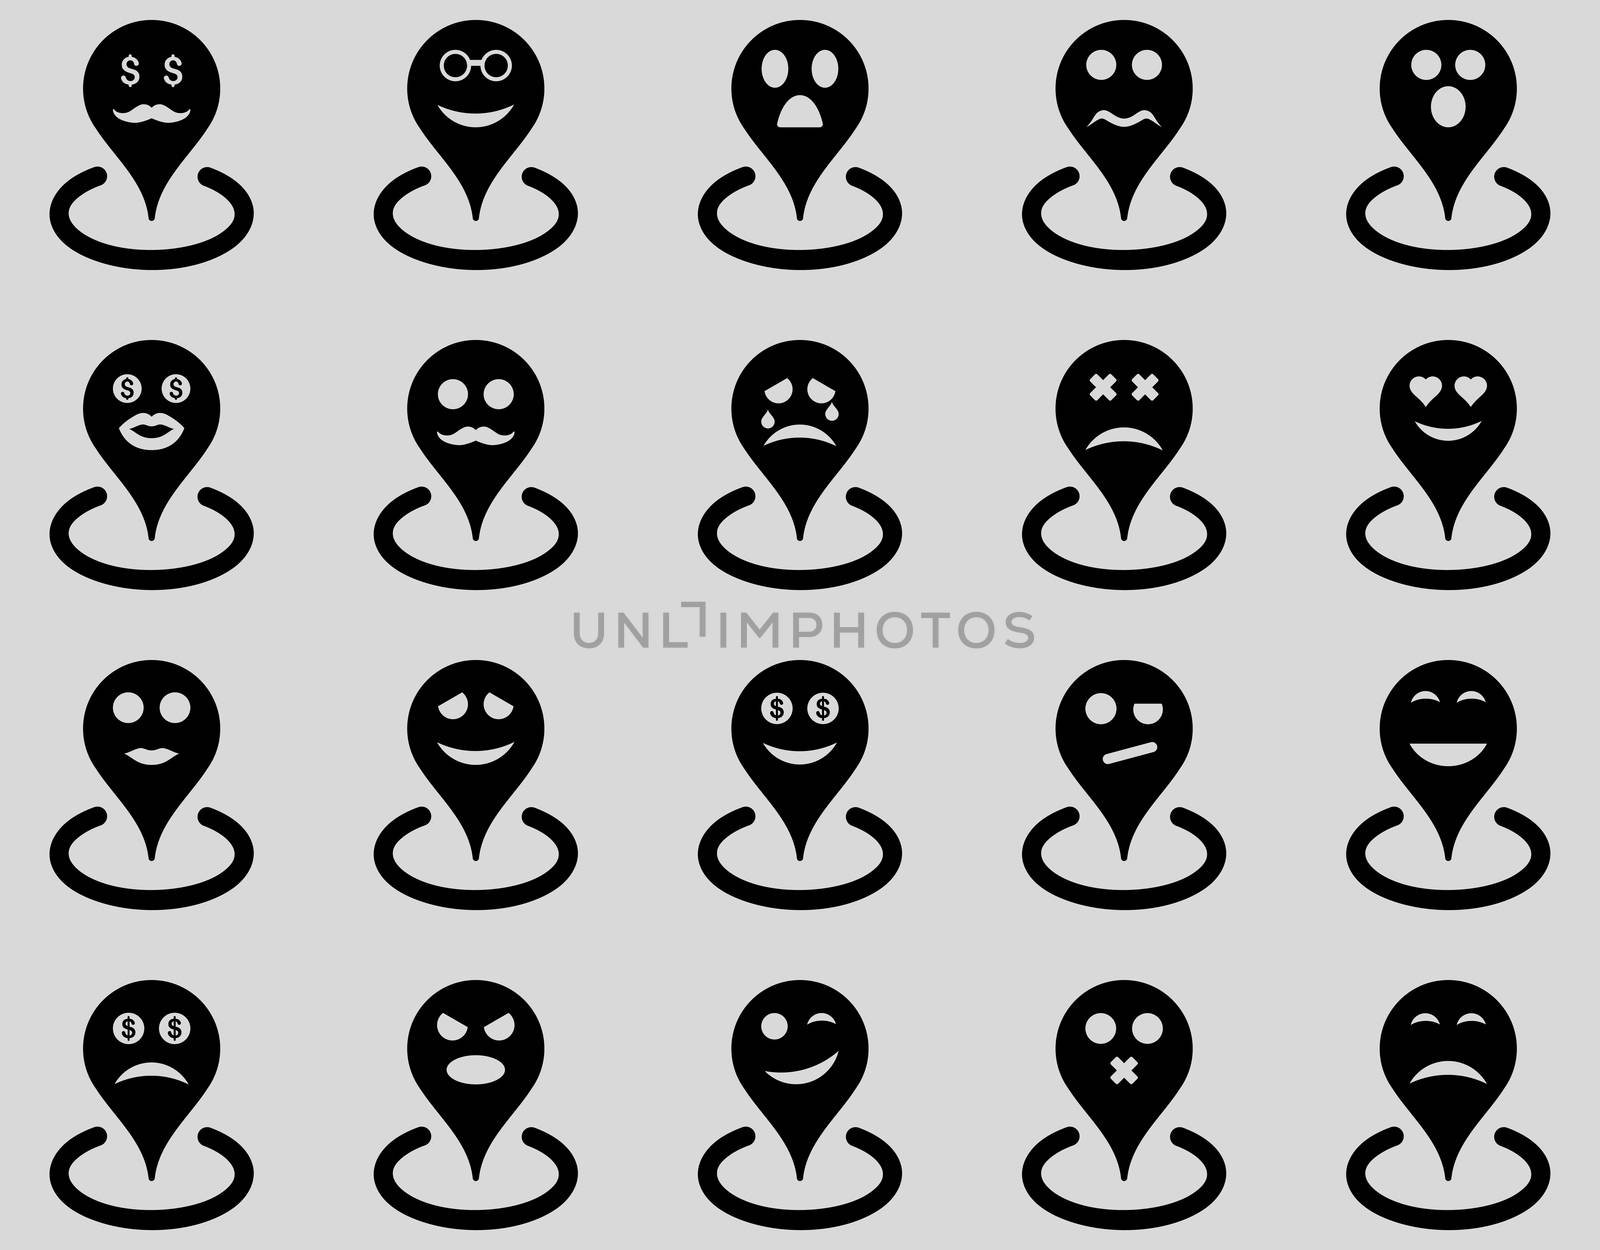 Smiled location icons by ahasoft